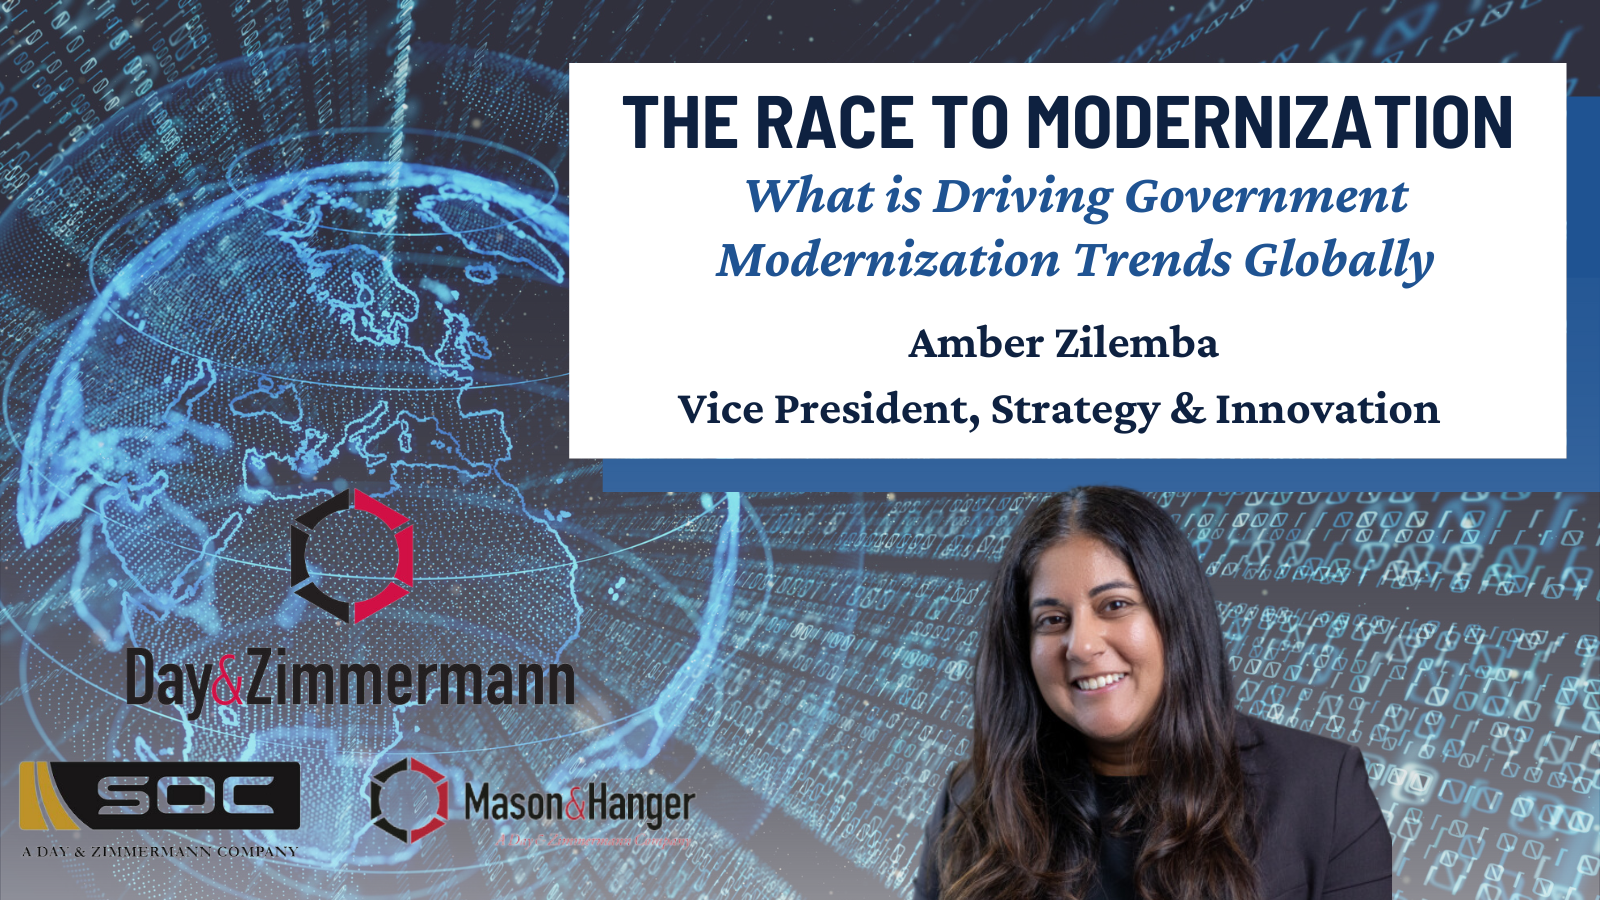 Video Series: The Race to Modernization - What is Driving Government Modernization Trends Globally